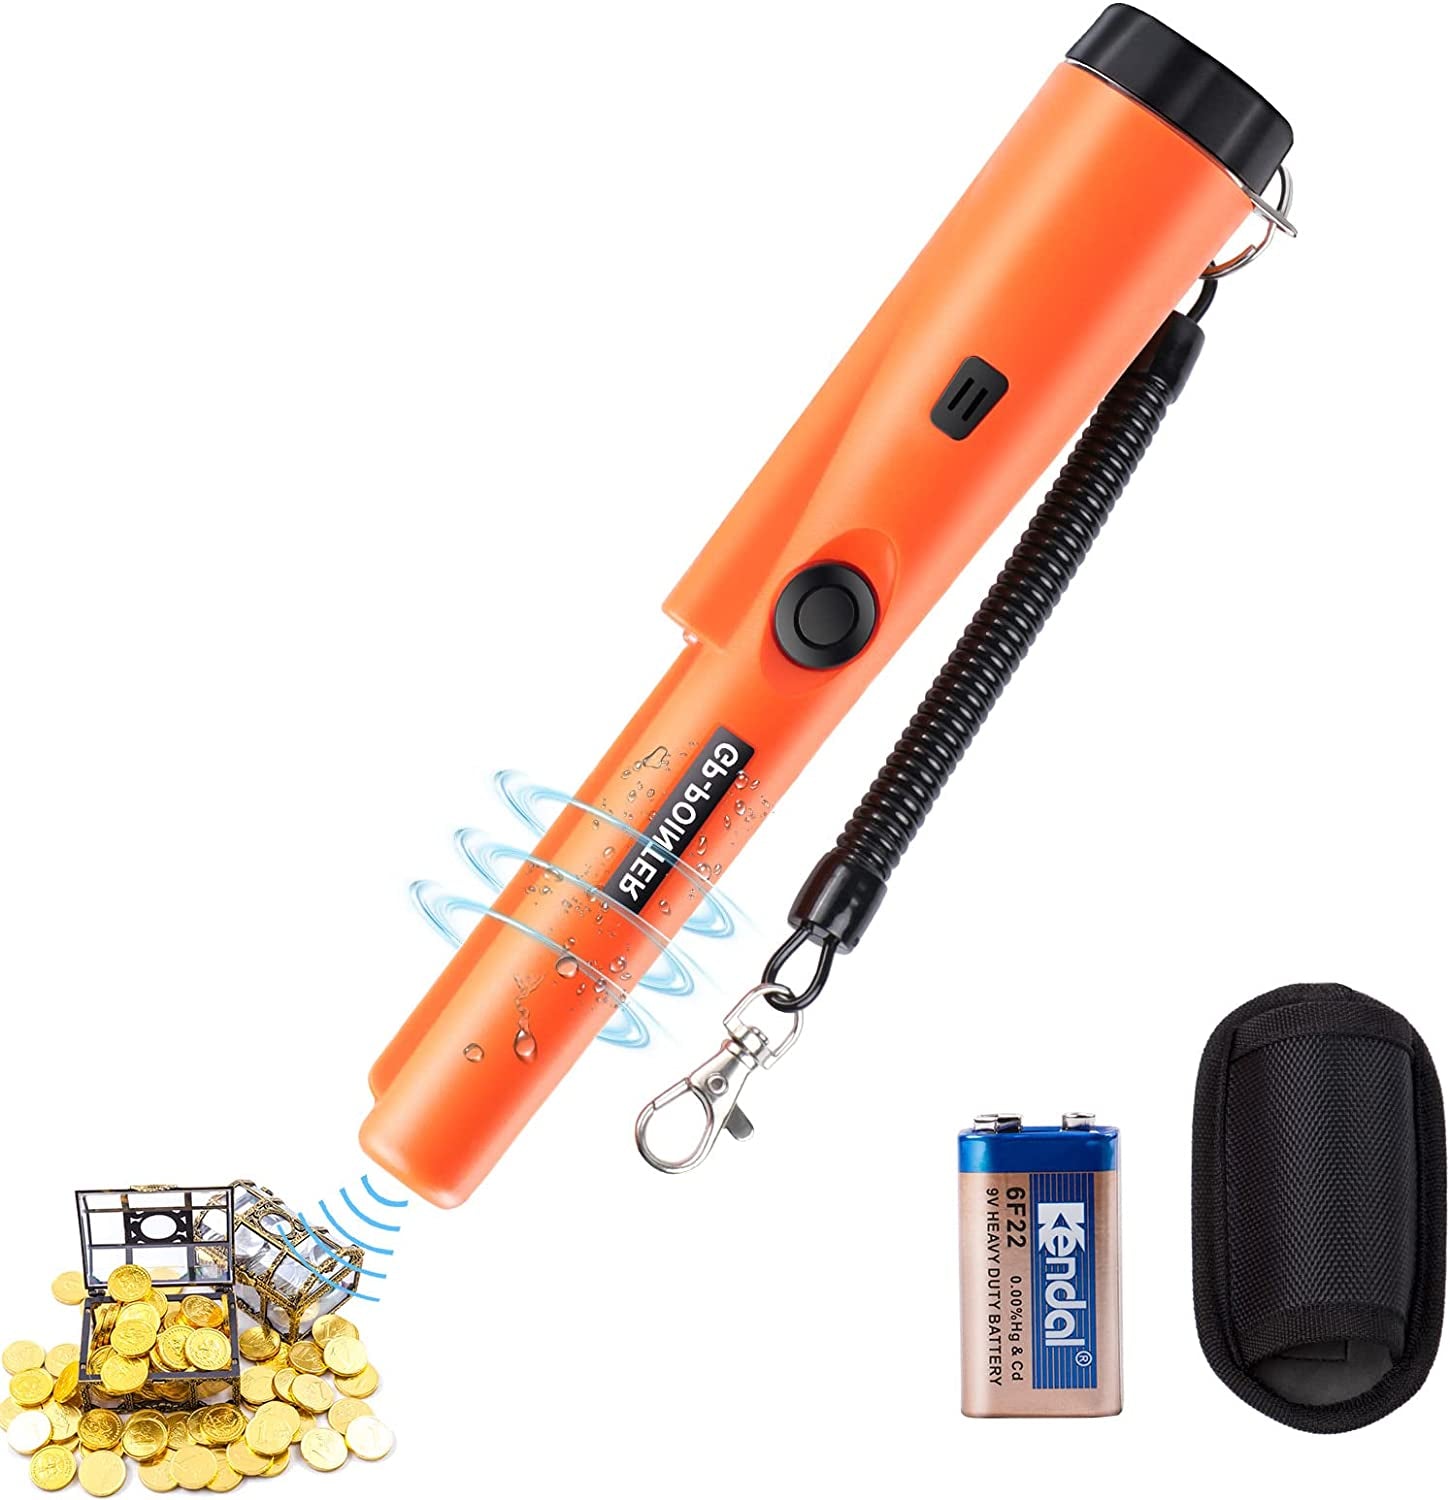 GLGLMA, GLGLMA Metal Detector Pinpointer,Gold Detector 360°High Accuracy Search,3 Modes with LED Light,Handheld Waterproof Metal Detector for Kids&Adults(Orange)